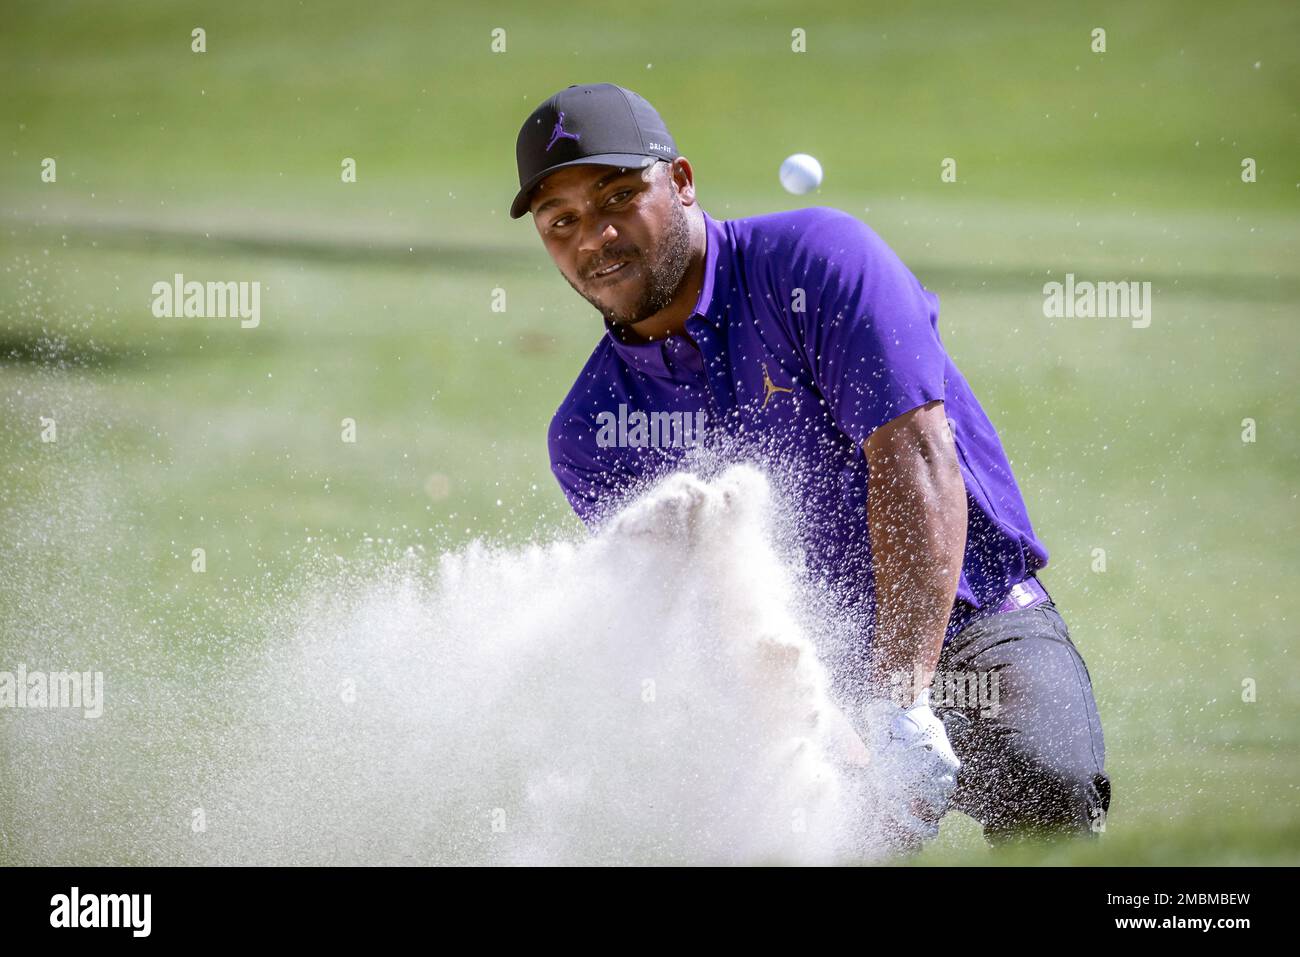 Harold Varner III hits out of a bunker on the ninth hole during the final round of the RBC Heritage golf tournament, Sunday, April 17, 2022, in Hilton Head Island, S.C